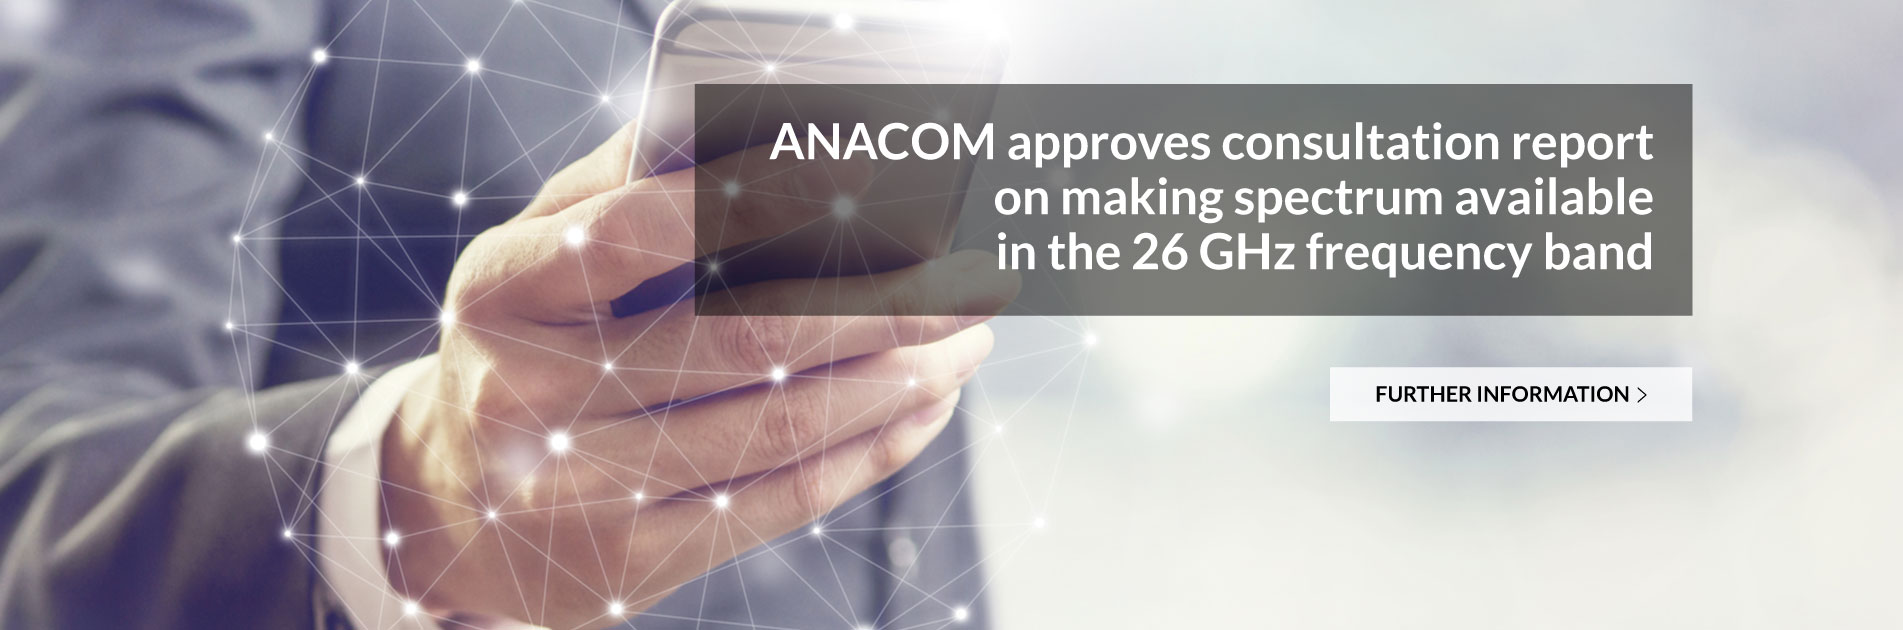 ANACOM approves consultation report on making spectrum available in the 26 GHz frequency band.